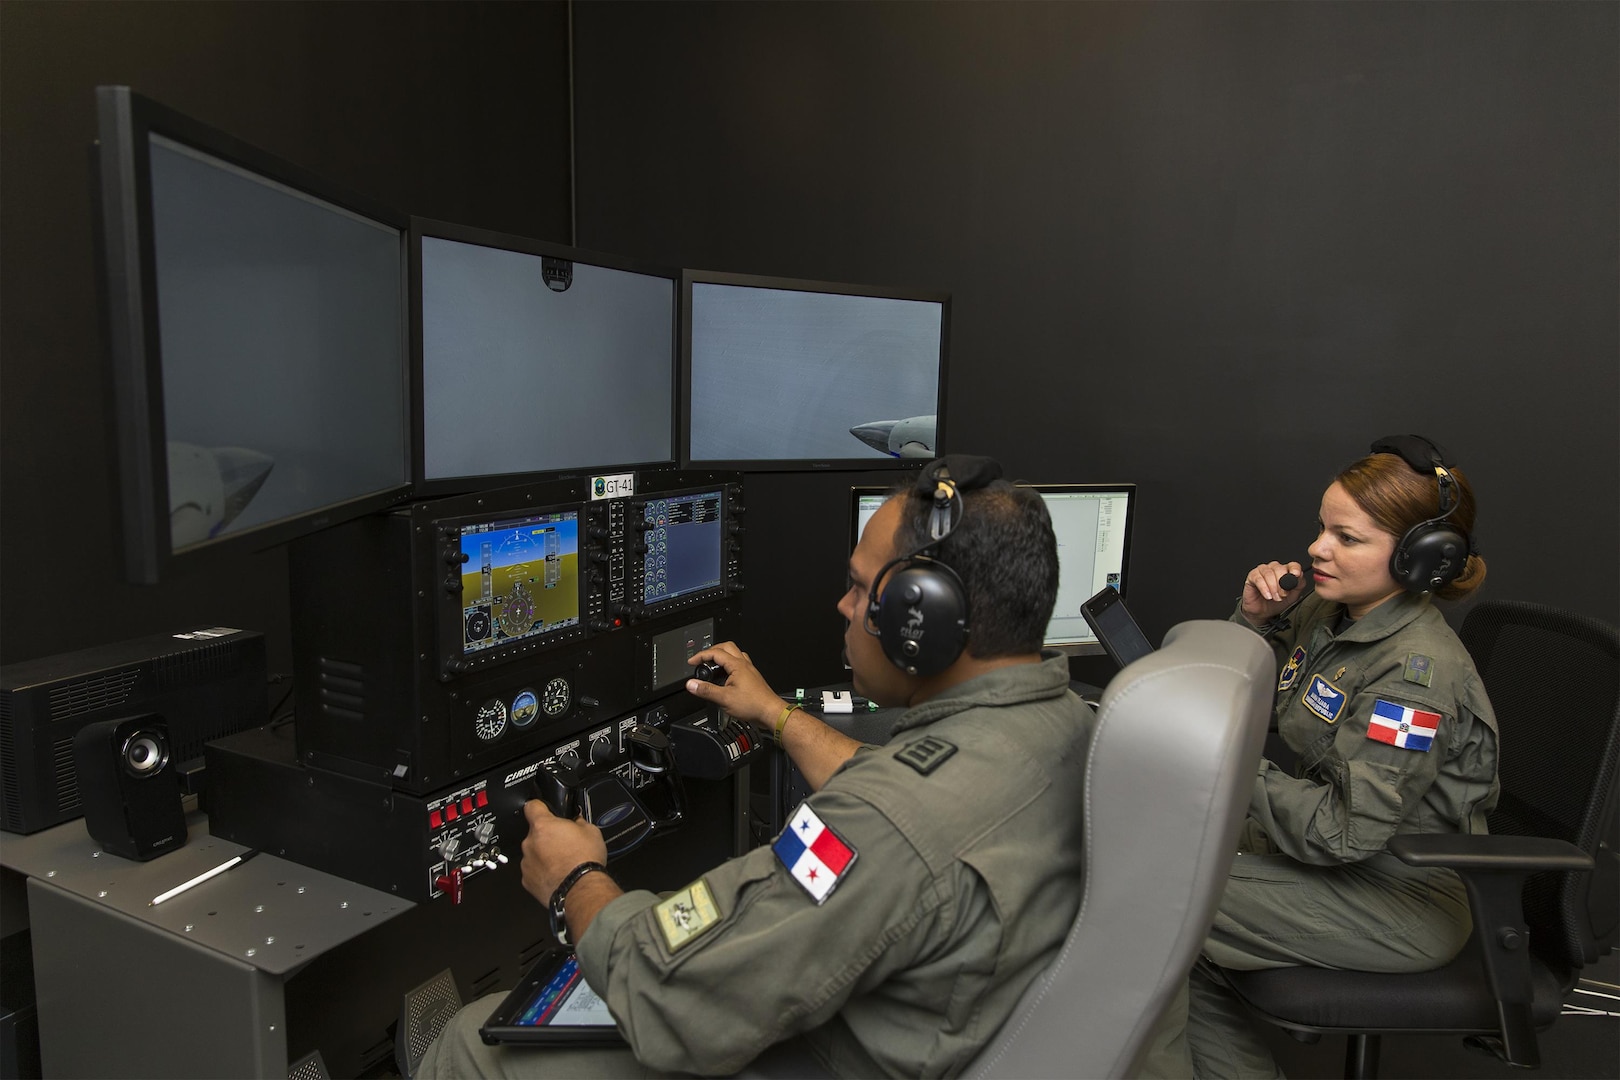 Maj. Maria Tejada-Quintana, who is a guest instructor at the Inter-American Air Forces Academy at Joint Base San Antonio-Lackland, is the only female flight guest instructor teaching international students from partner nations in the Western Hemisphere.